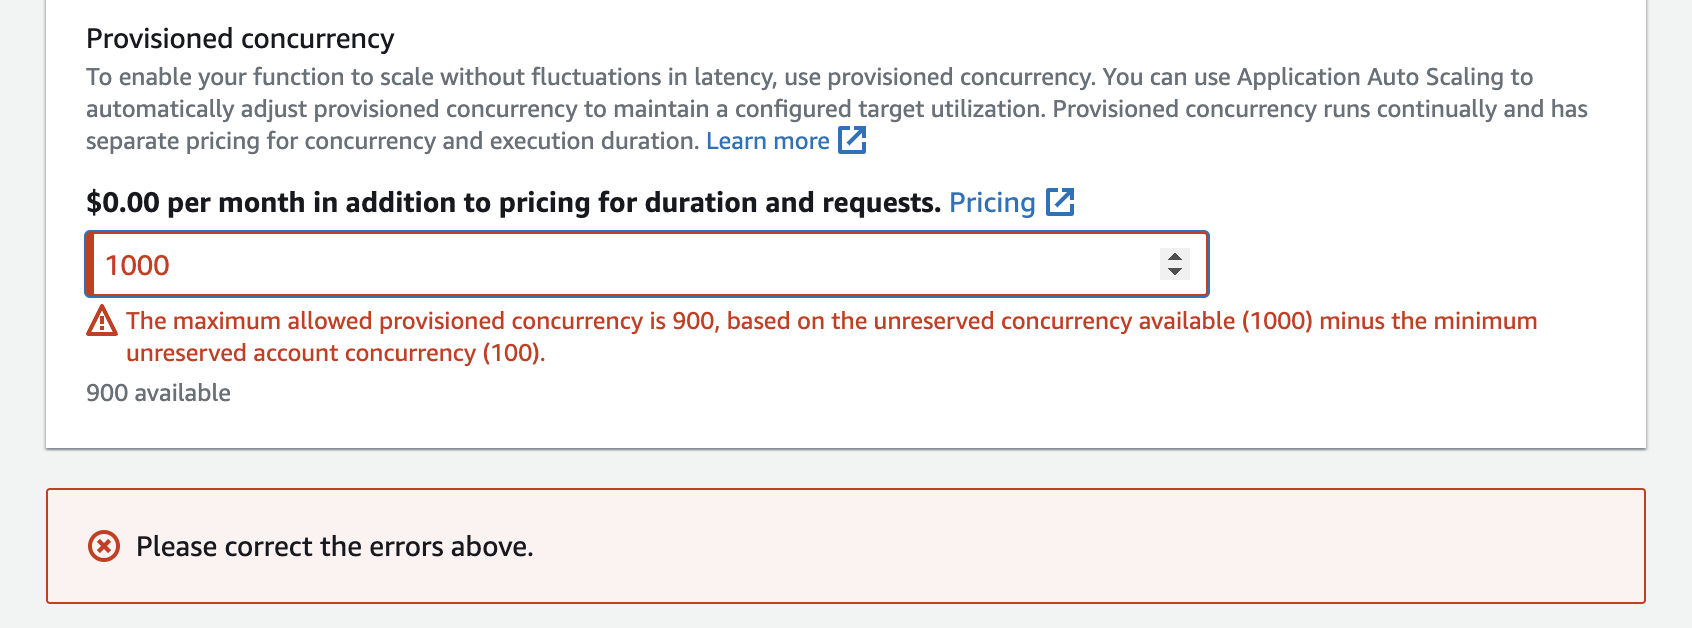 
        An error occurs if you try to allocate too much provisioned concurrency.
      